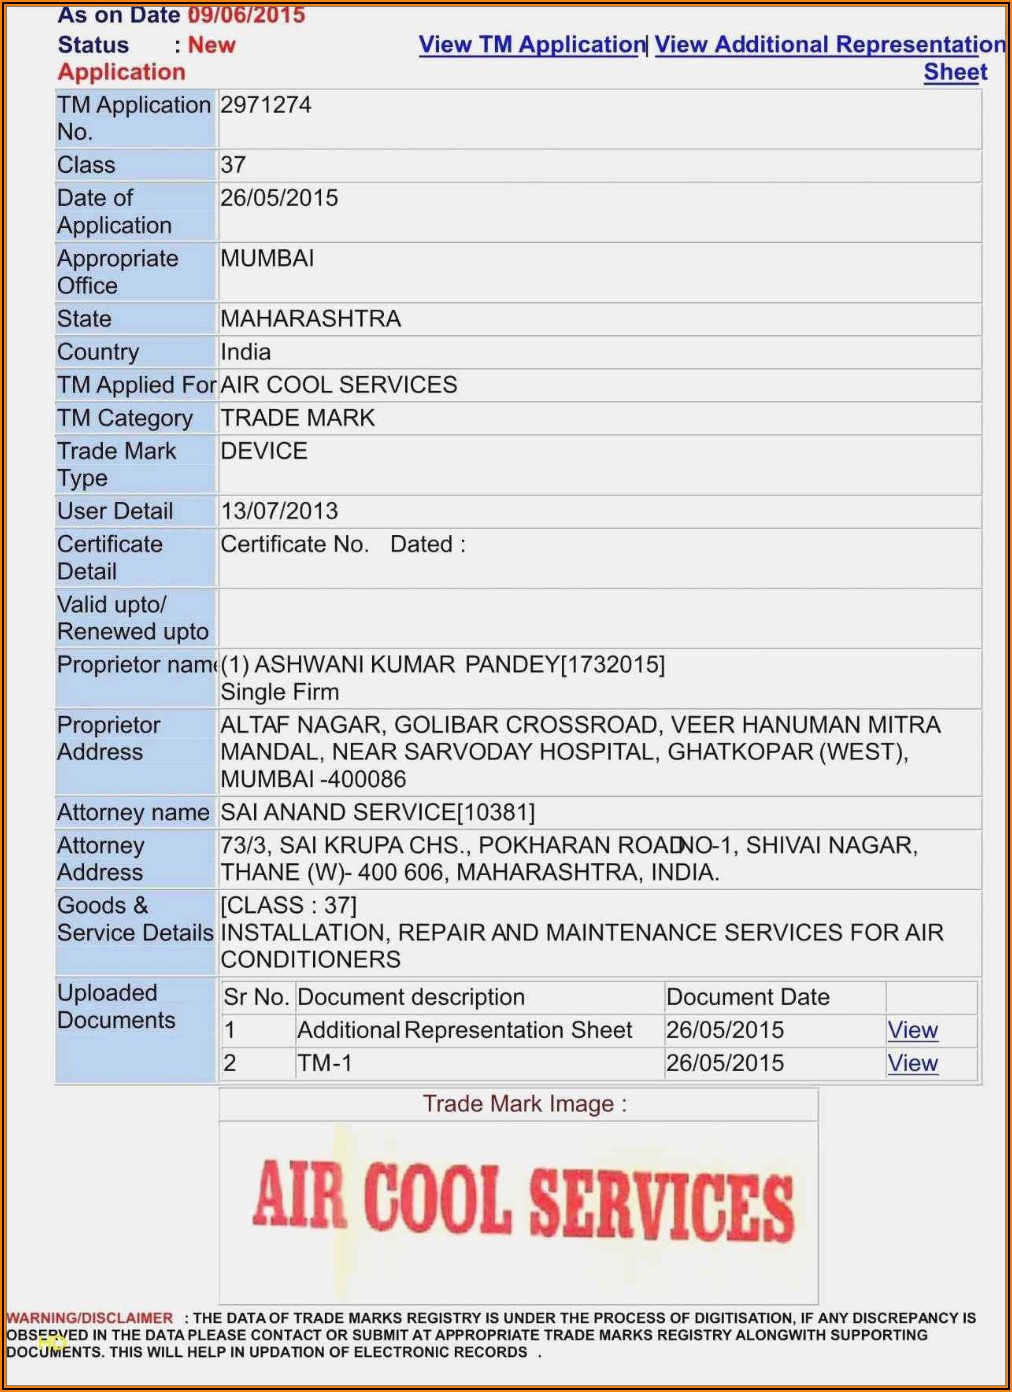 Heating And Air Conditioning Invoice Template